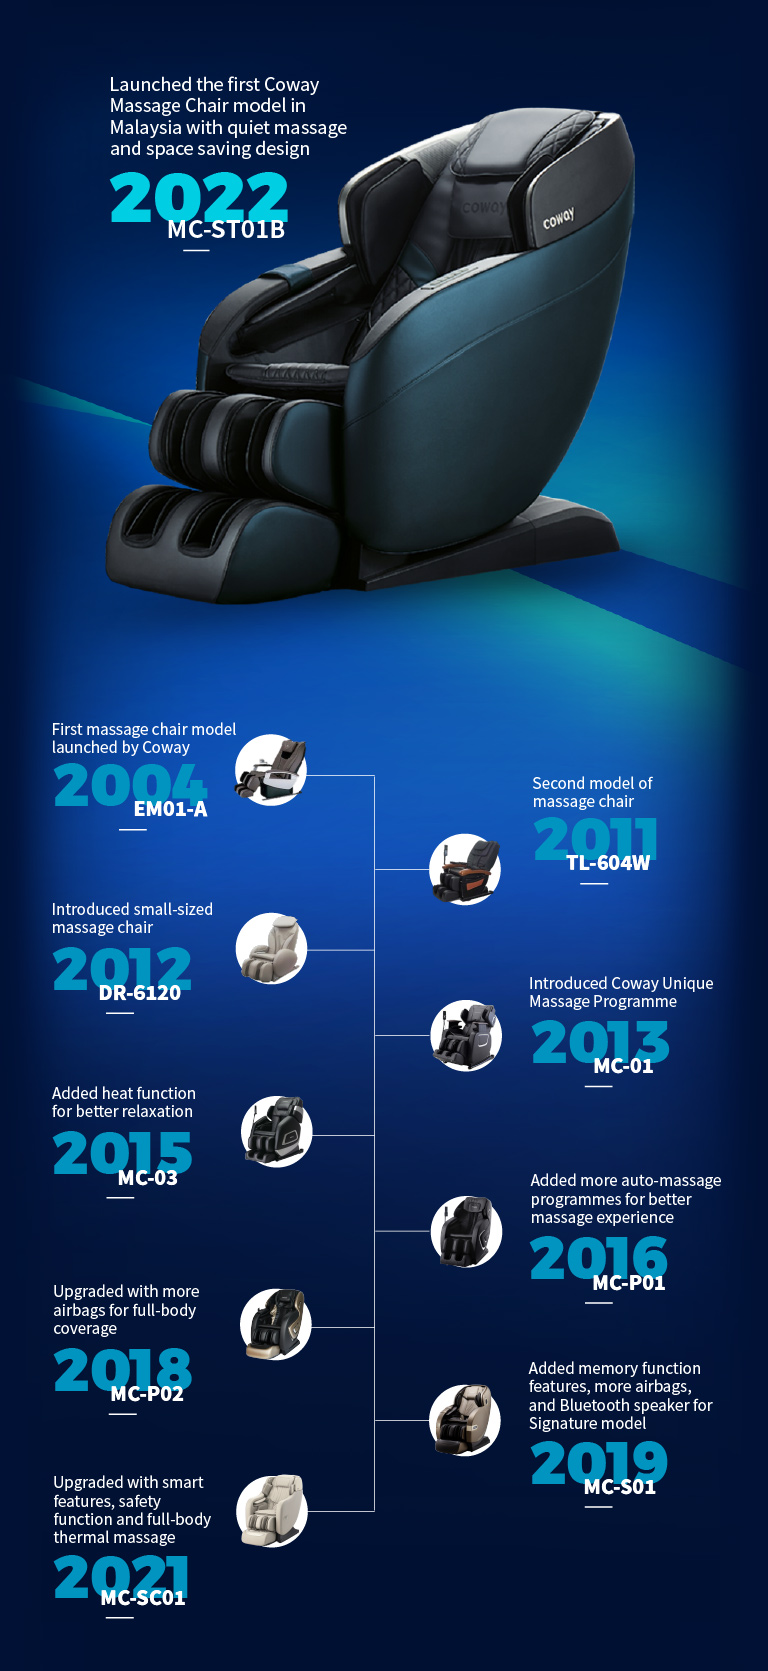 Coway Massage Chair - Paving The Way For 18 Years Of Innovation